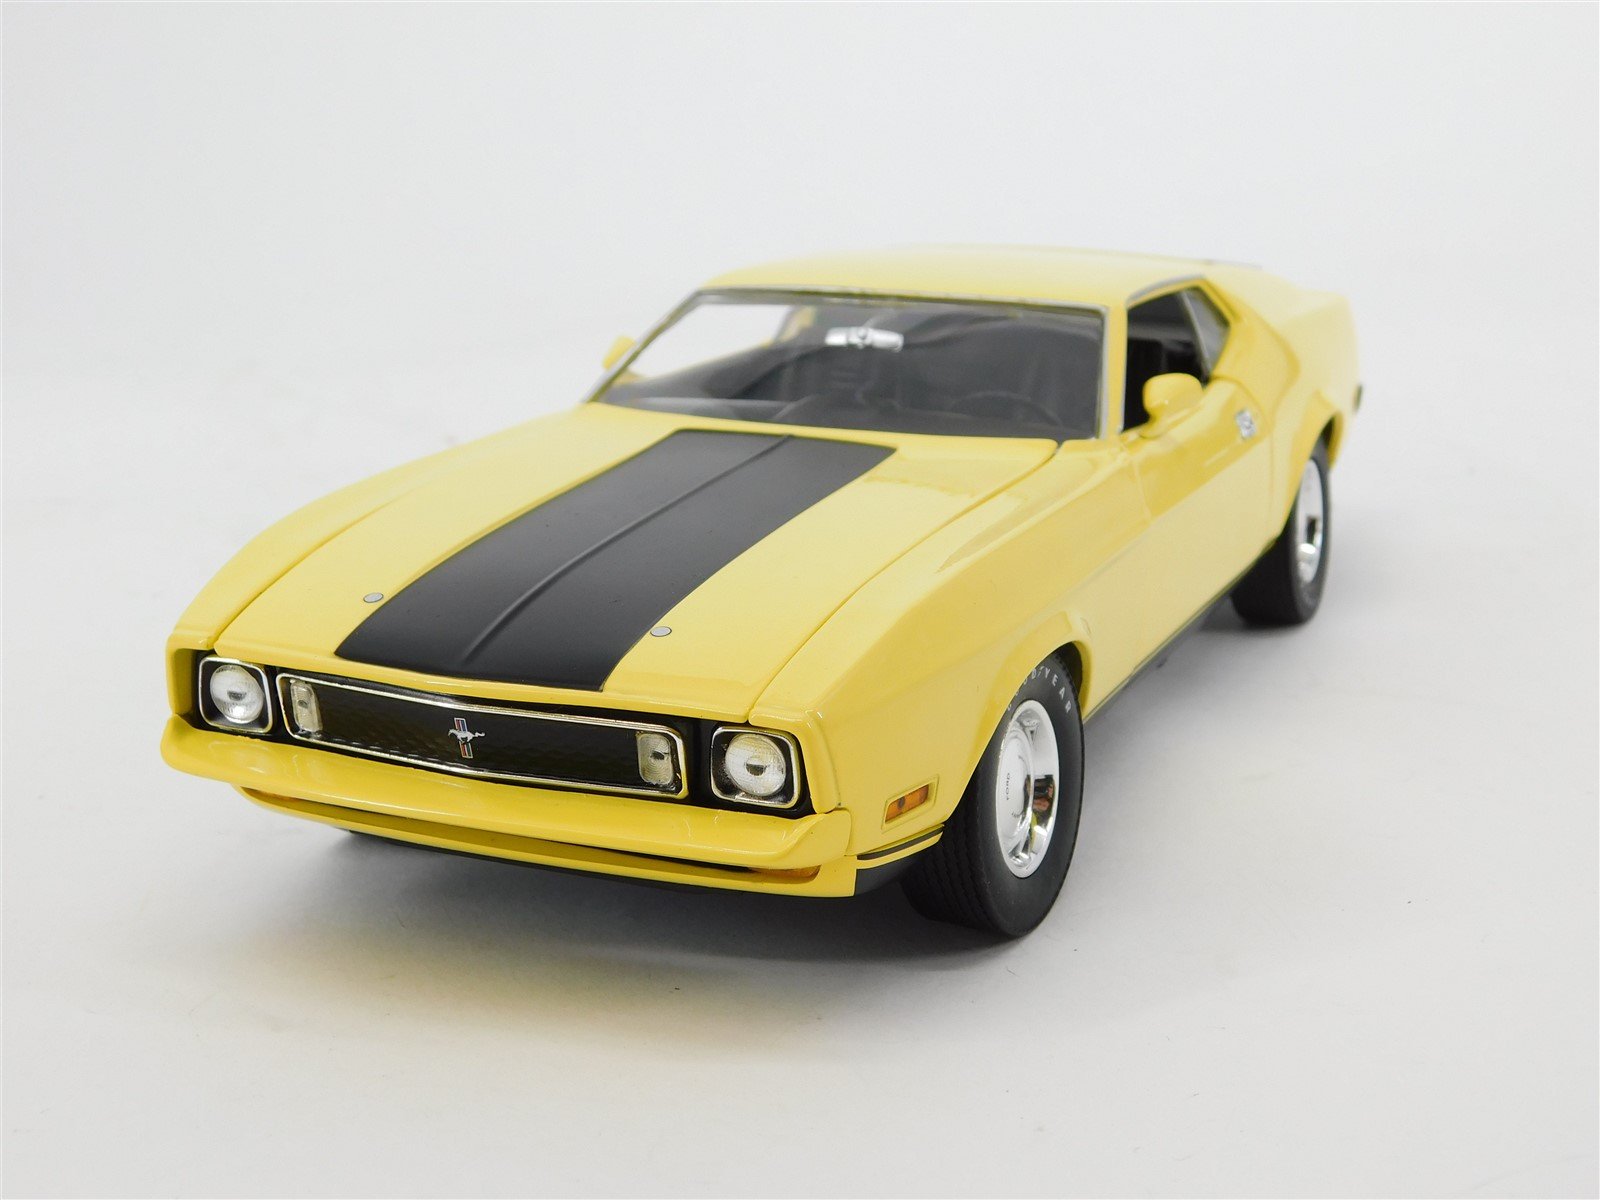 1:18 Scale Greenlight Die-Cast Automobile 1971 Mustang Mach I Ram Air - Yellow